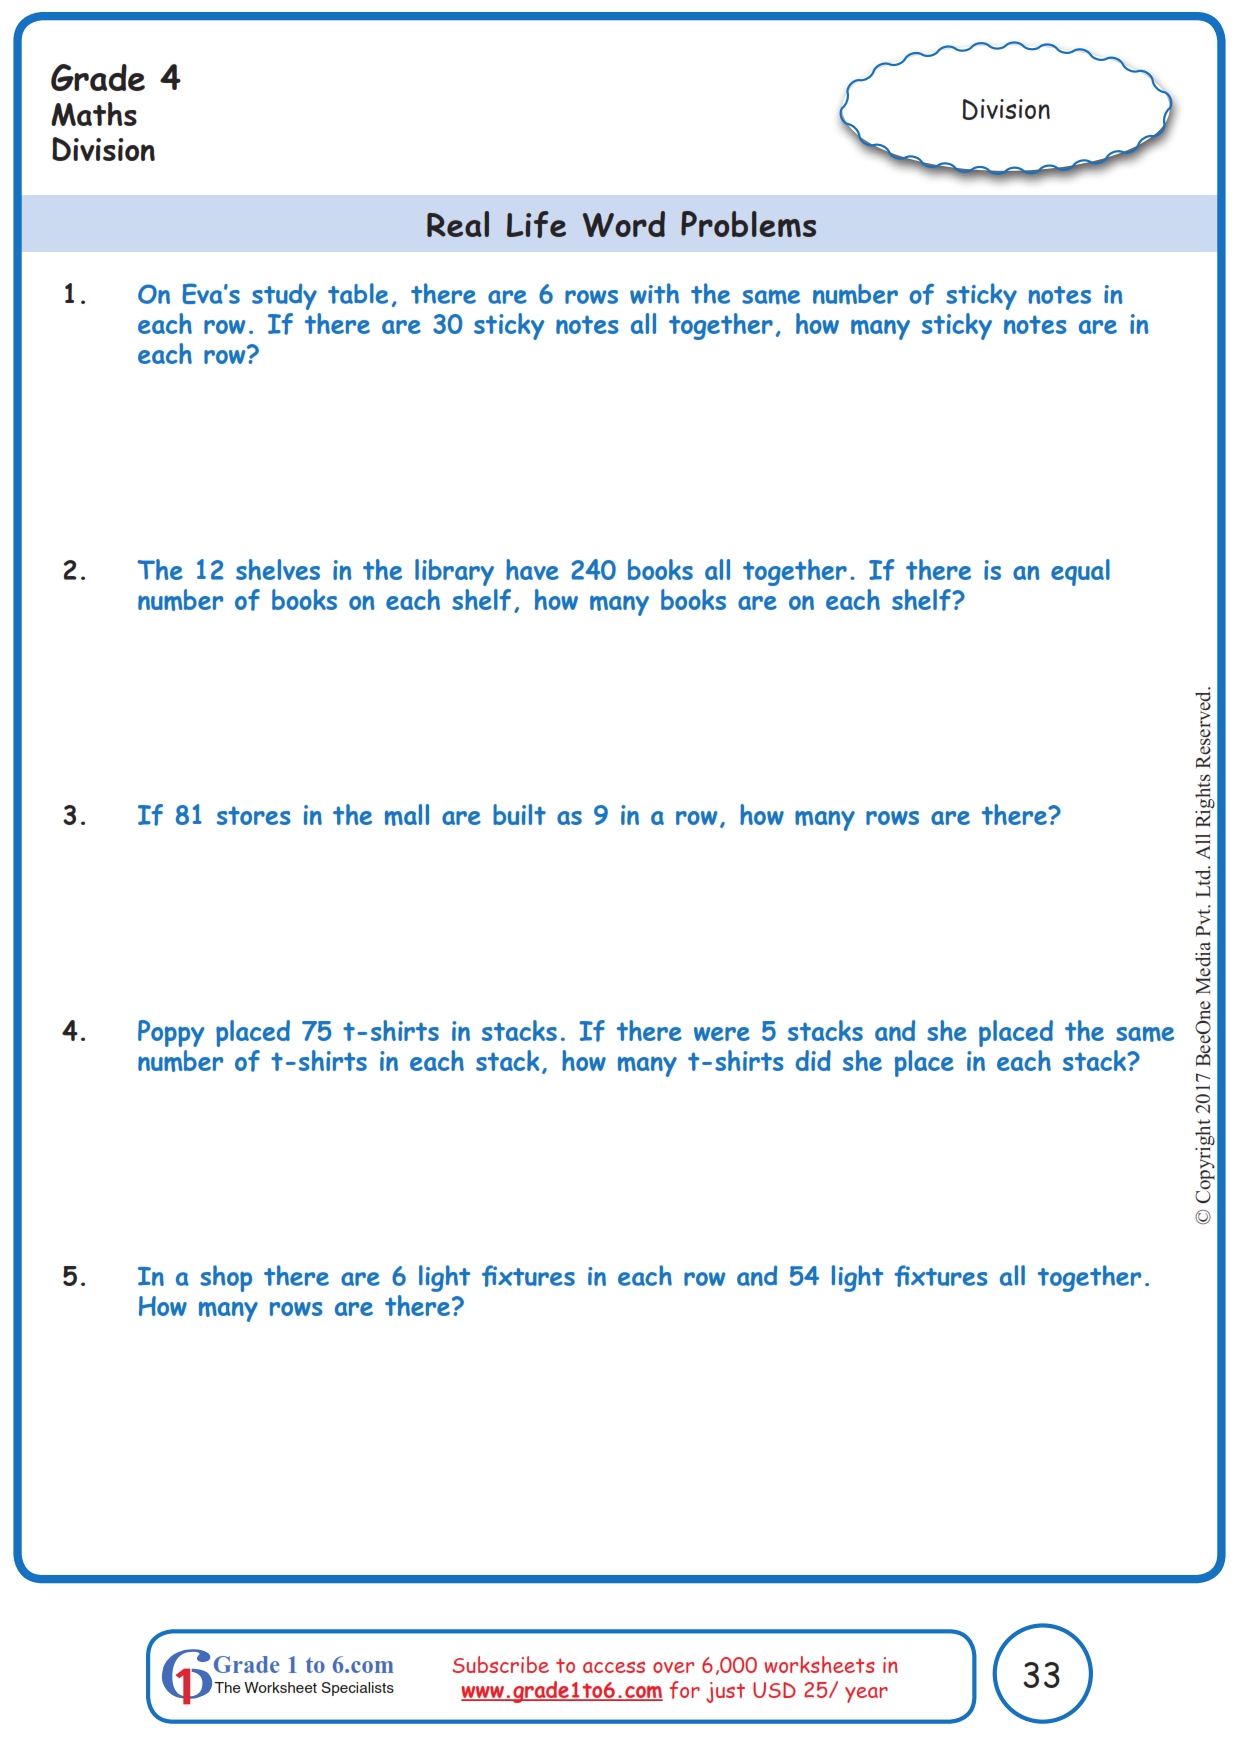 Division Word Problems Worksheets|www.grade1to6.com